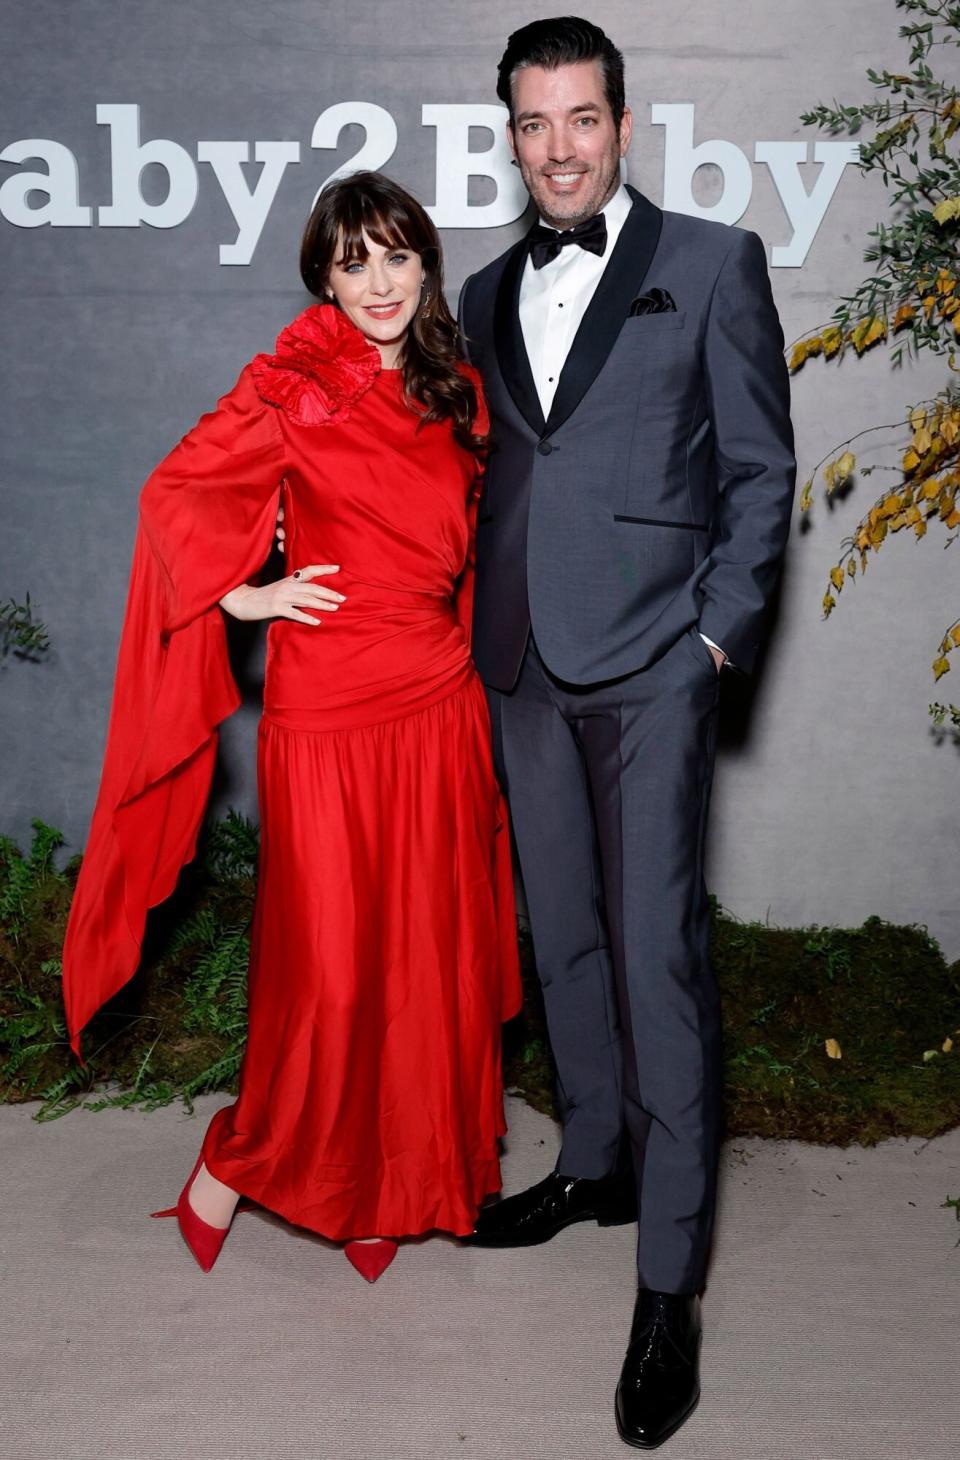 WEST HOLLYWOOD, CALIFORNIA - NOVEMBER 12: (L-R) Zooey Deschanel and Jonathan Scott attend the 2022 Baby2Baby Gala presented by Paul Mitchell at Pacific Design Center on November 12, 2022 in West Hollywood, California. (Photo by Stefanie Keenan/Getty Images for Baby2Baby)